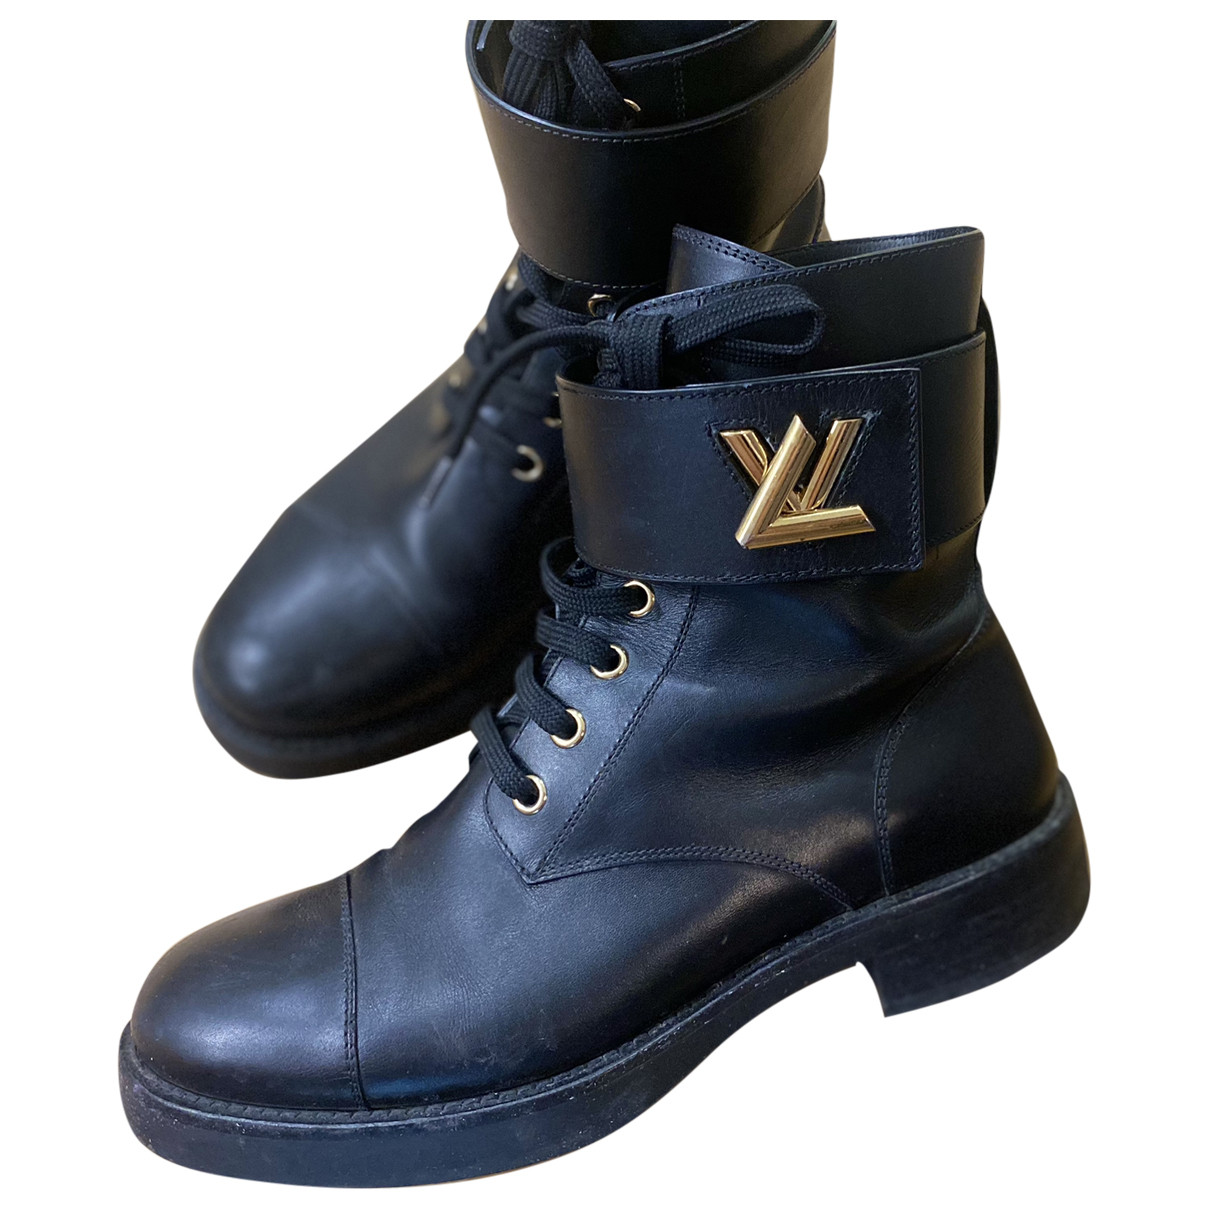 shoes Louis Vuitton ankle boots Wonderland for Female Leather 37.5 EU. Used condition